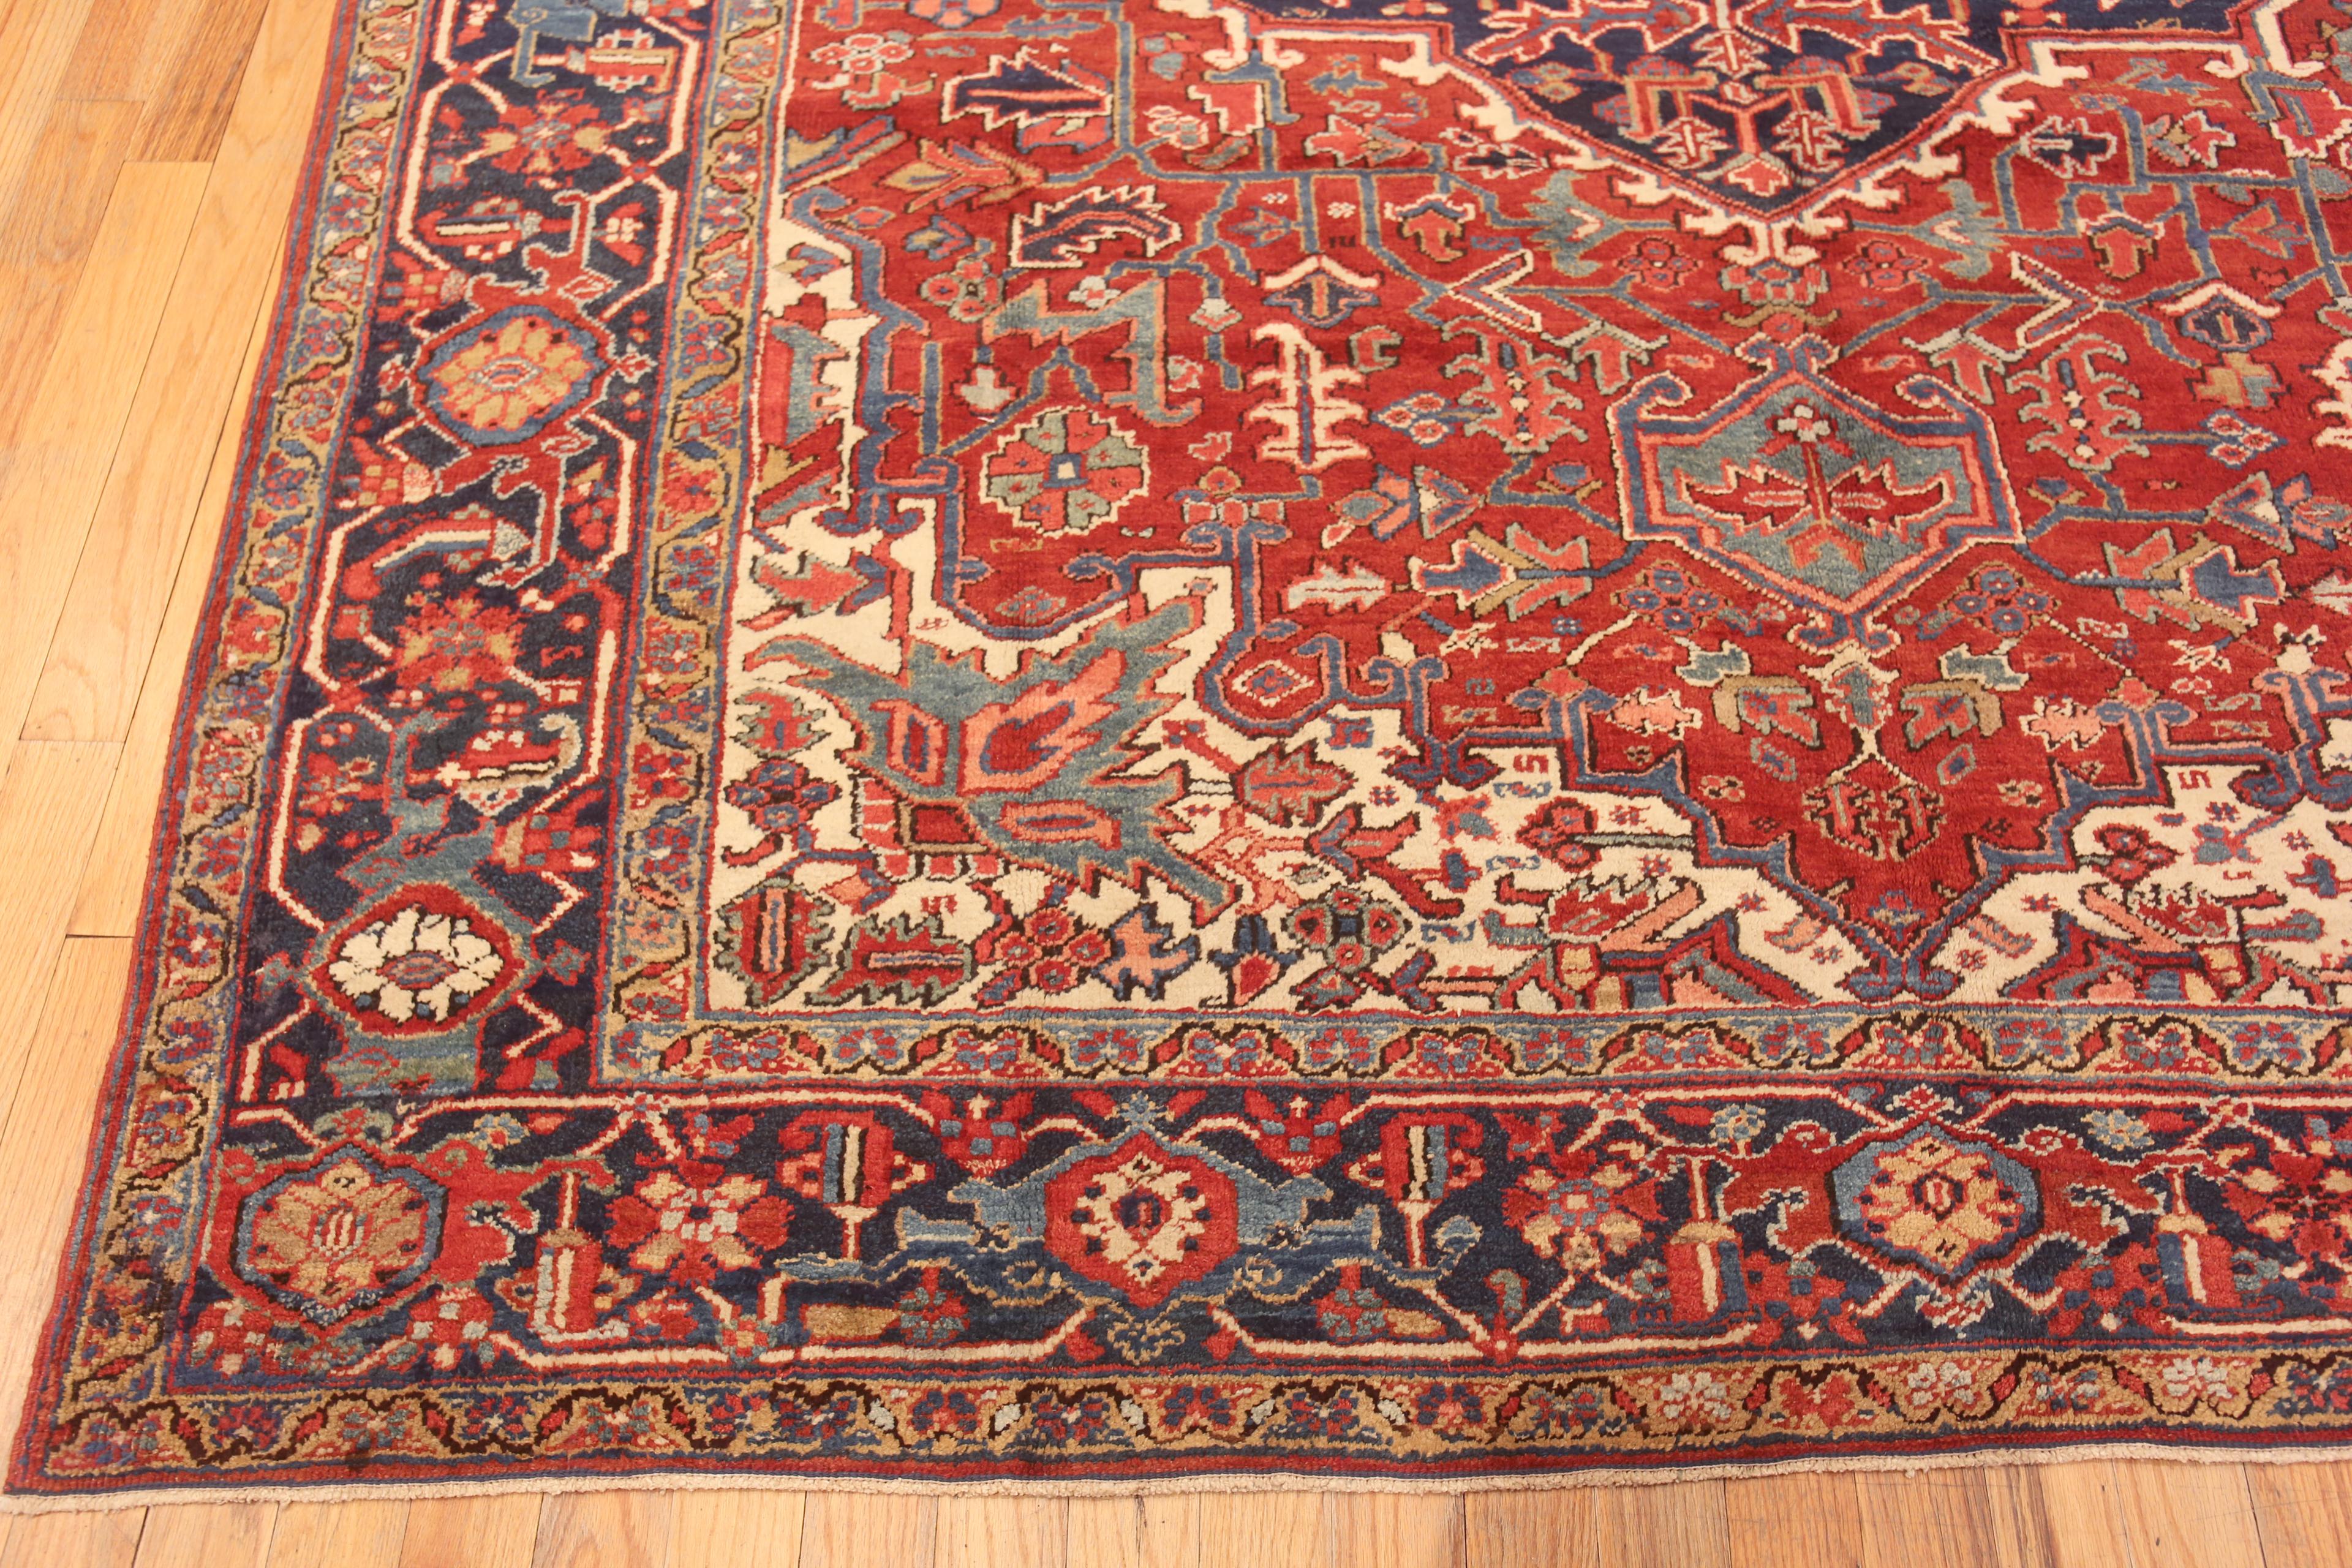 Hand-Knotted Gorgeous Antique Red Geometric Medallion Persian Heriz Rug 8'7